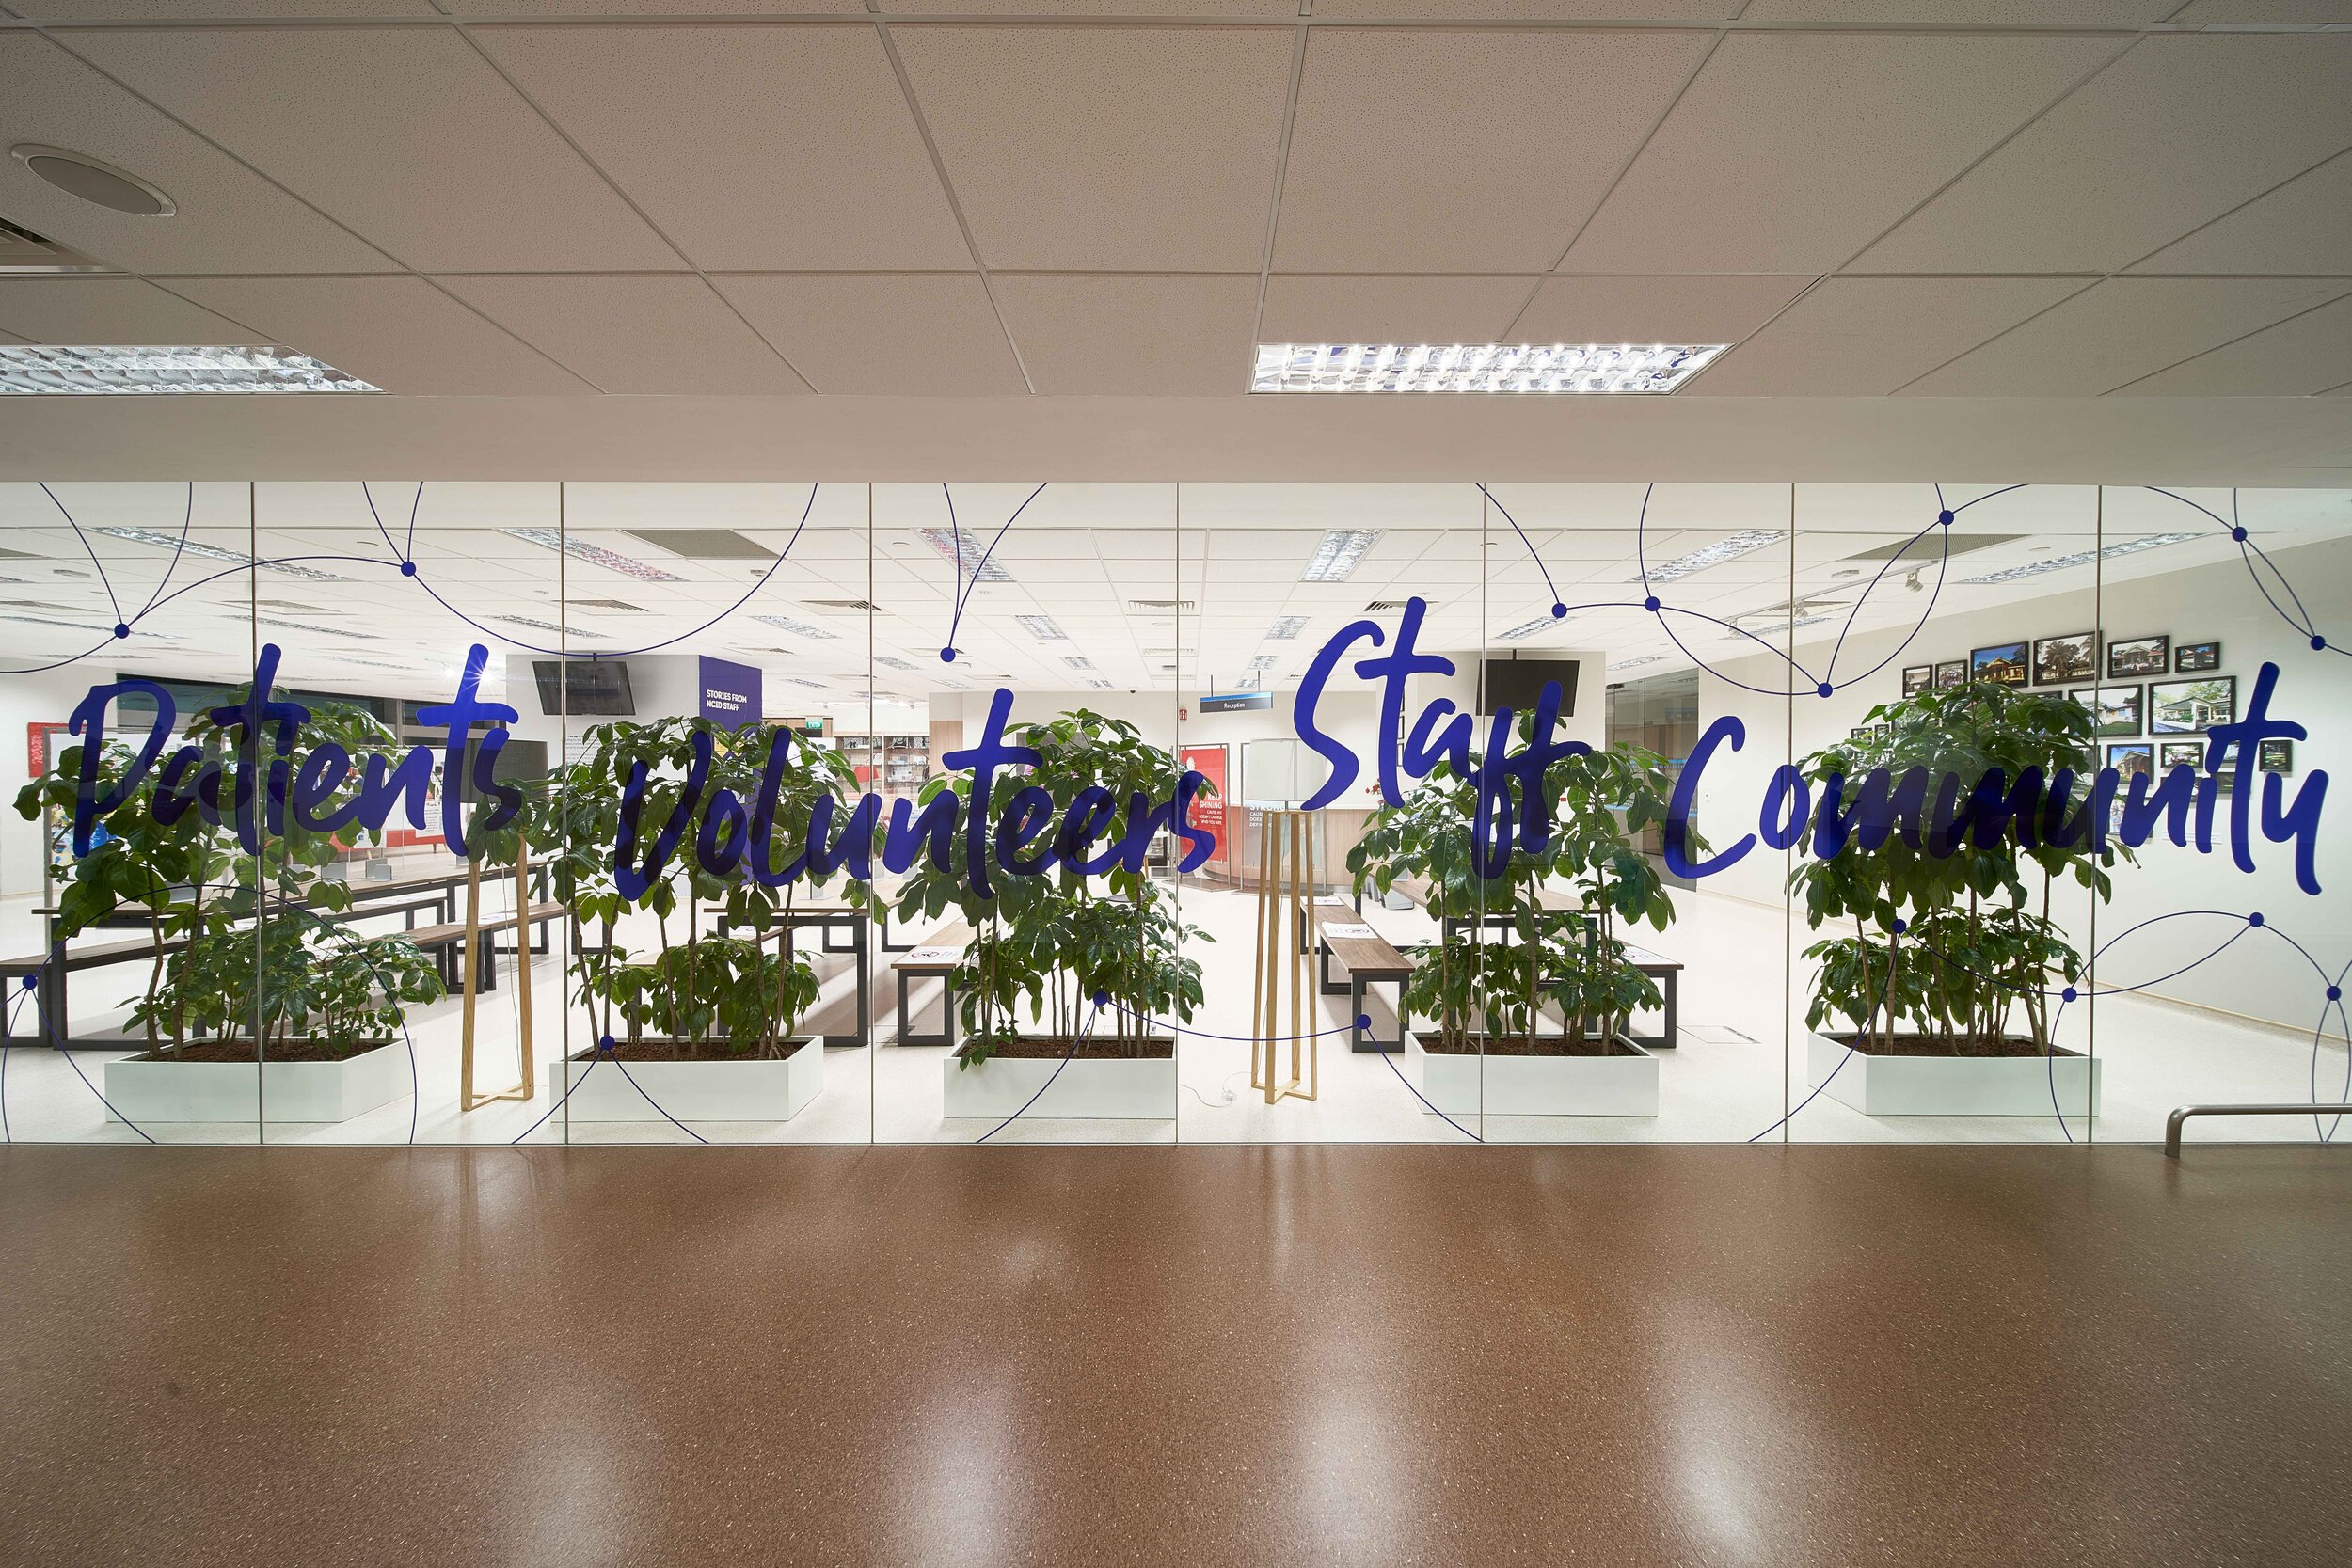 Large and eye-catching transparent stickers decorate the gallery without obscuring the client’s space